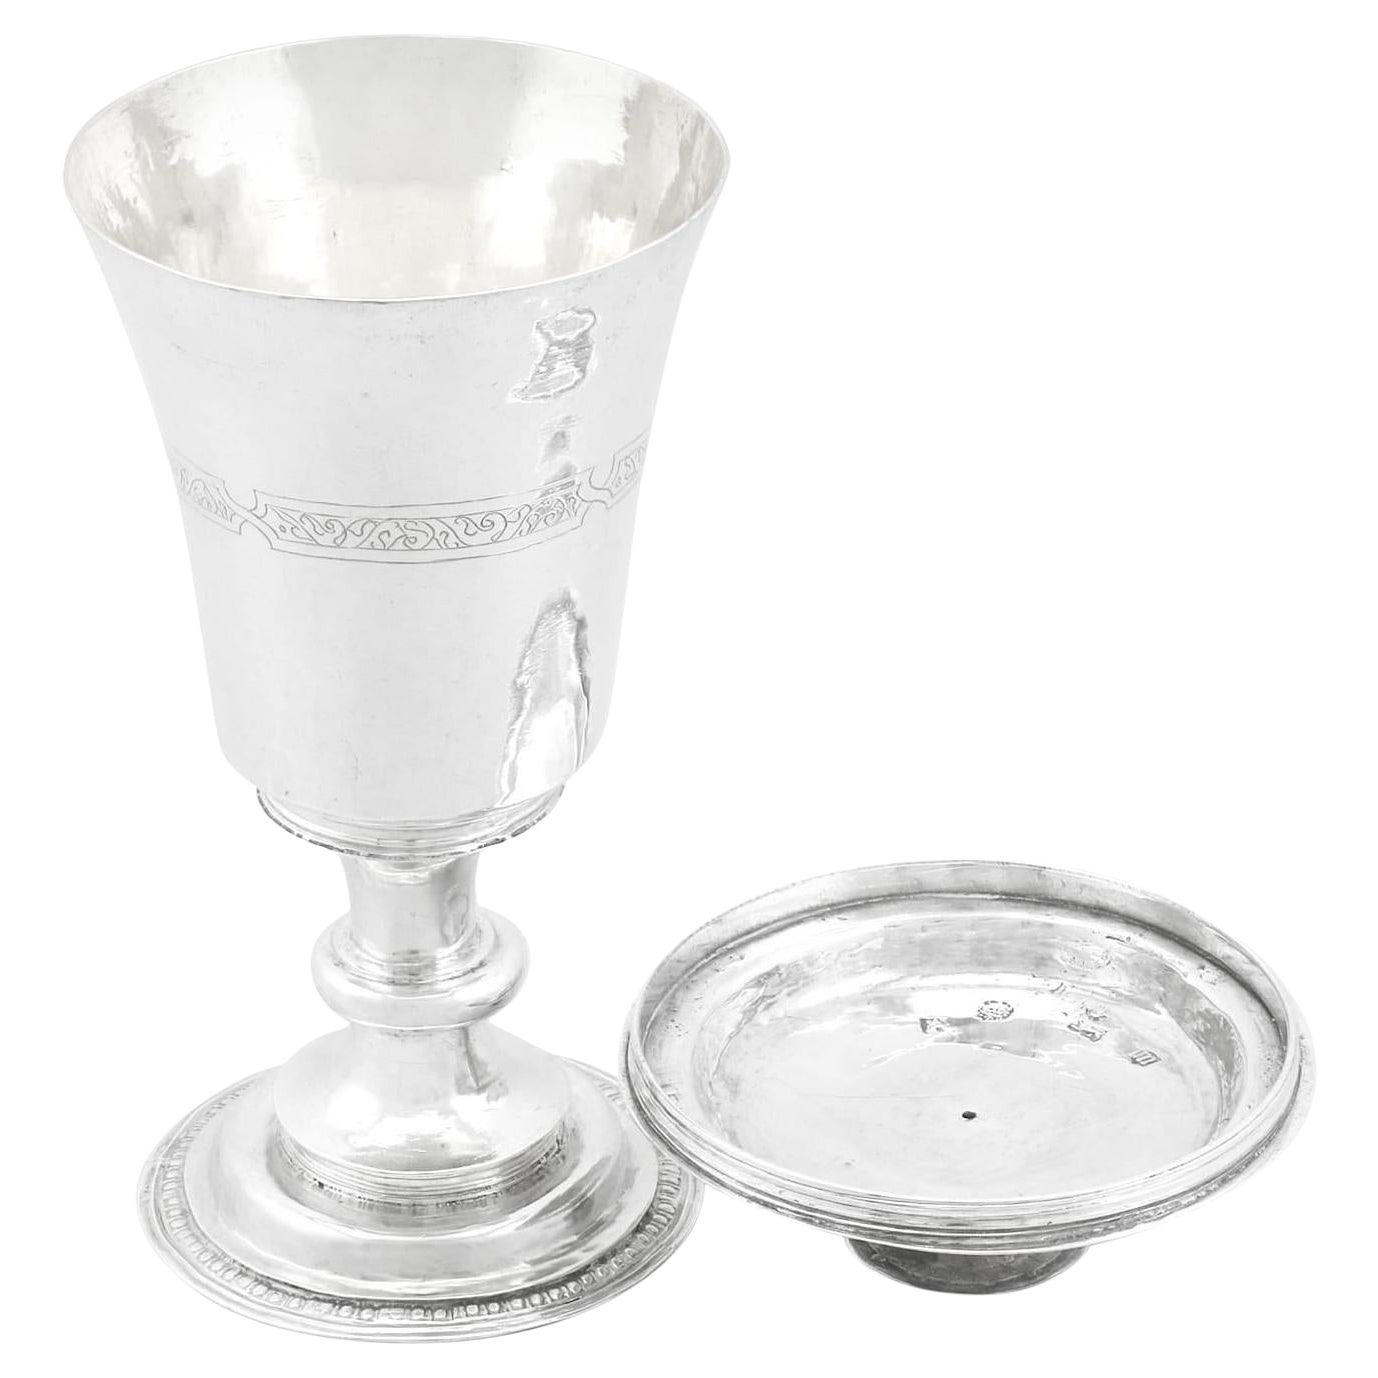 1500s Elizabethan Sterling Silver Communion Chalice and Paten For Sale